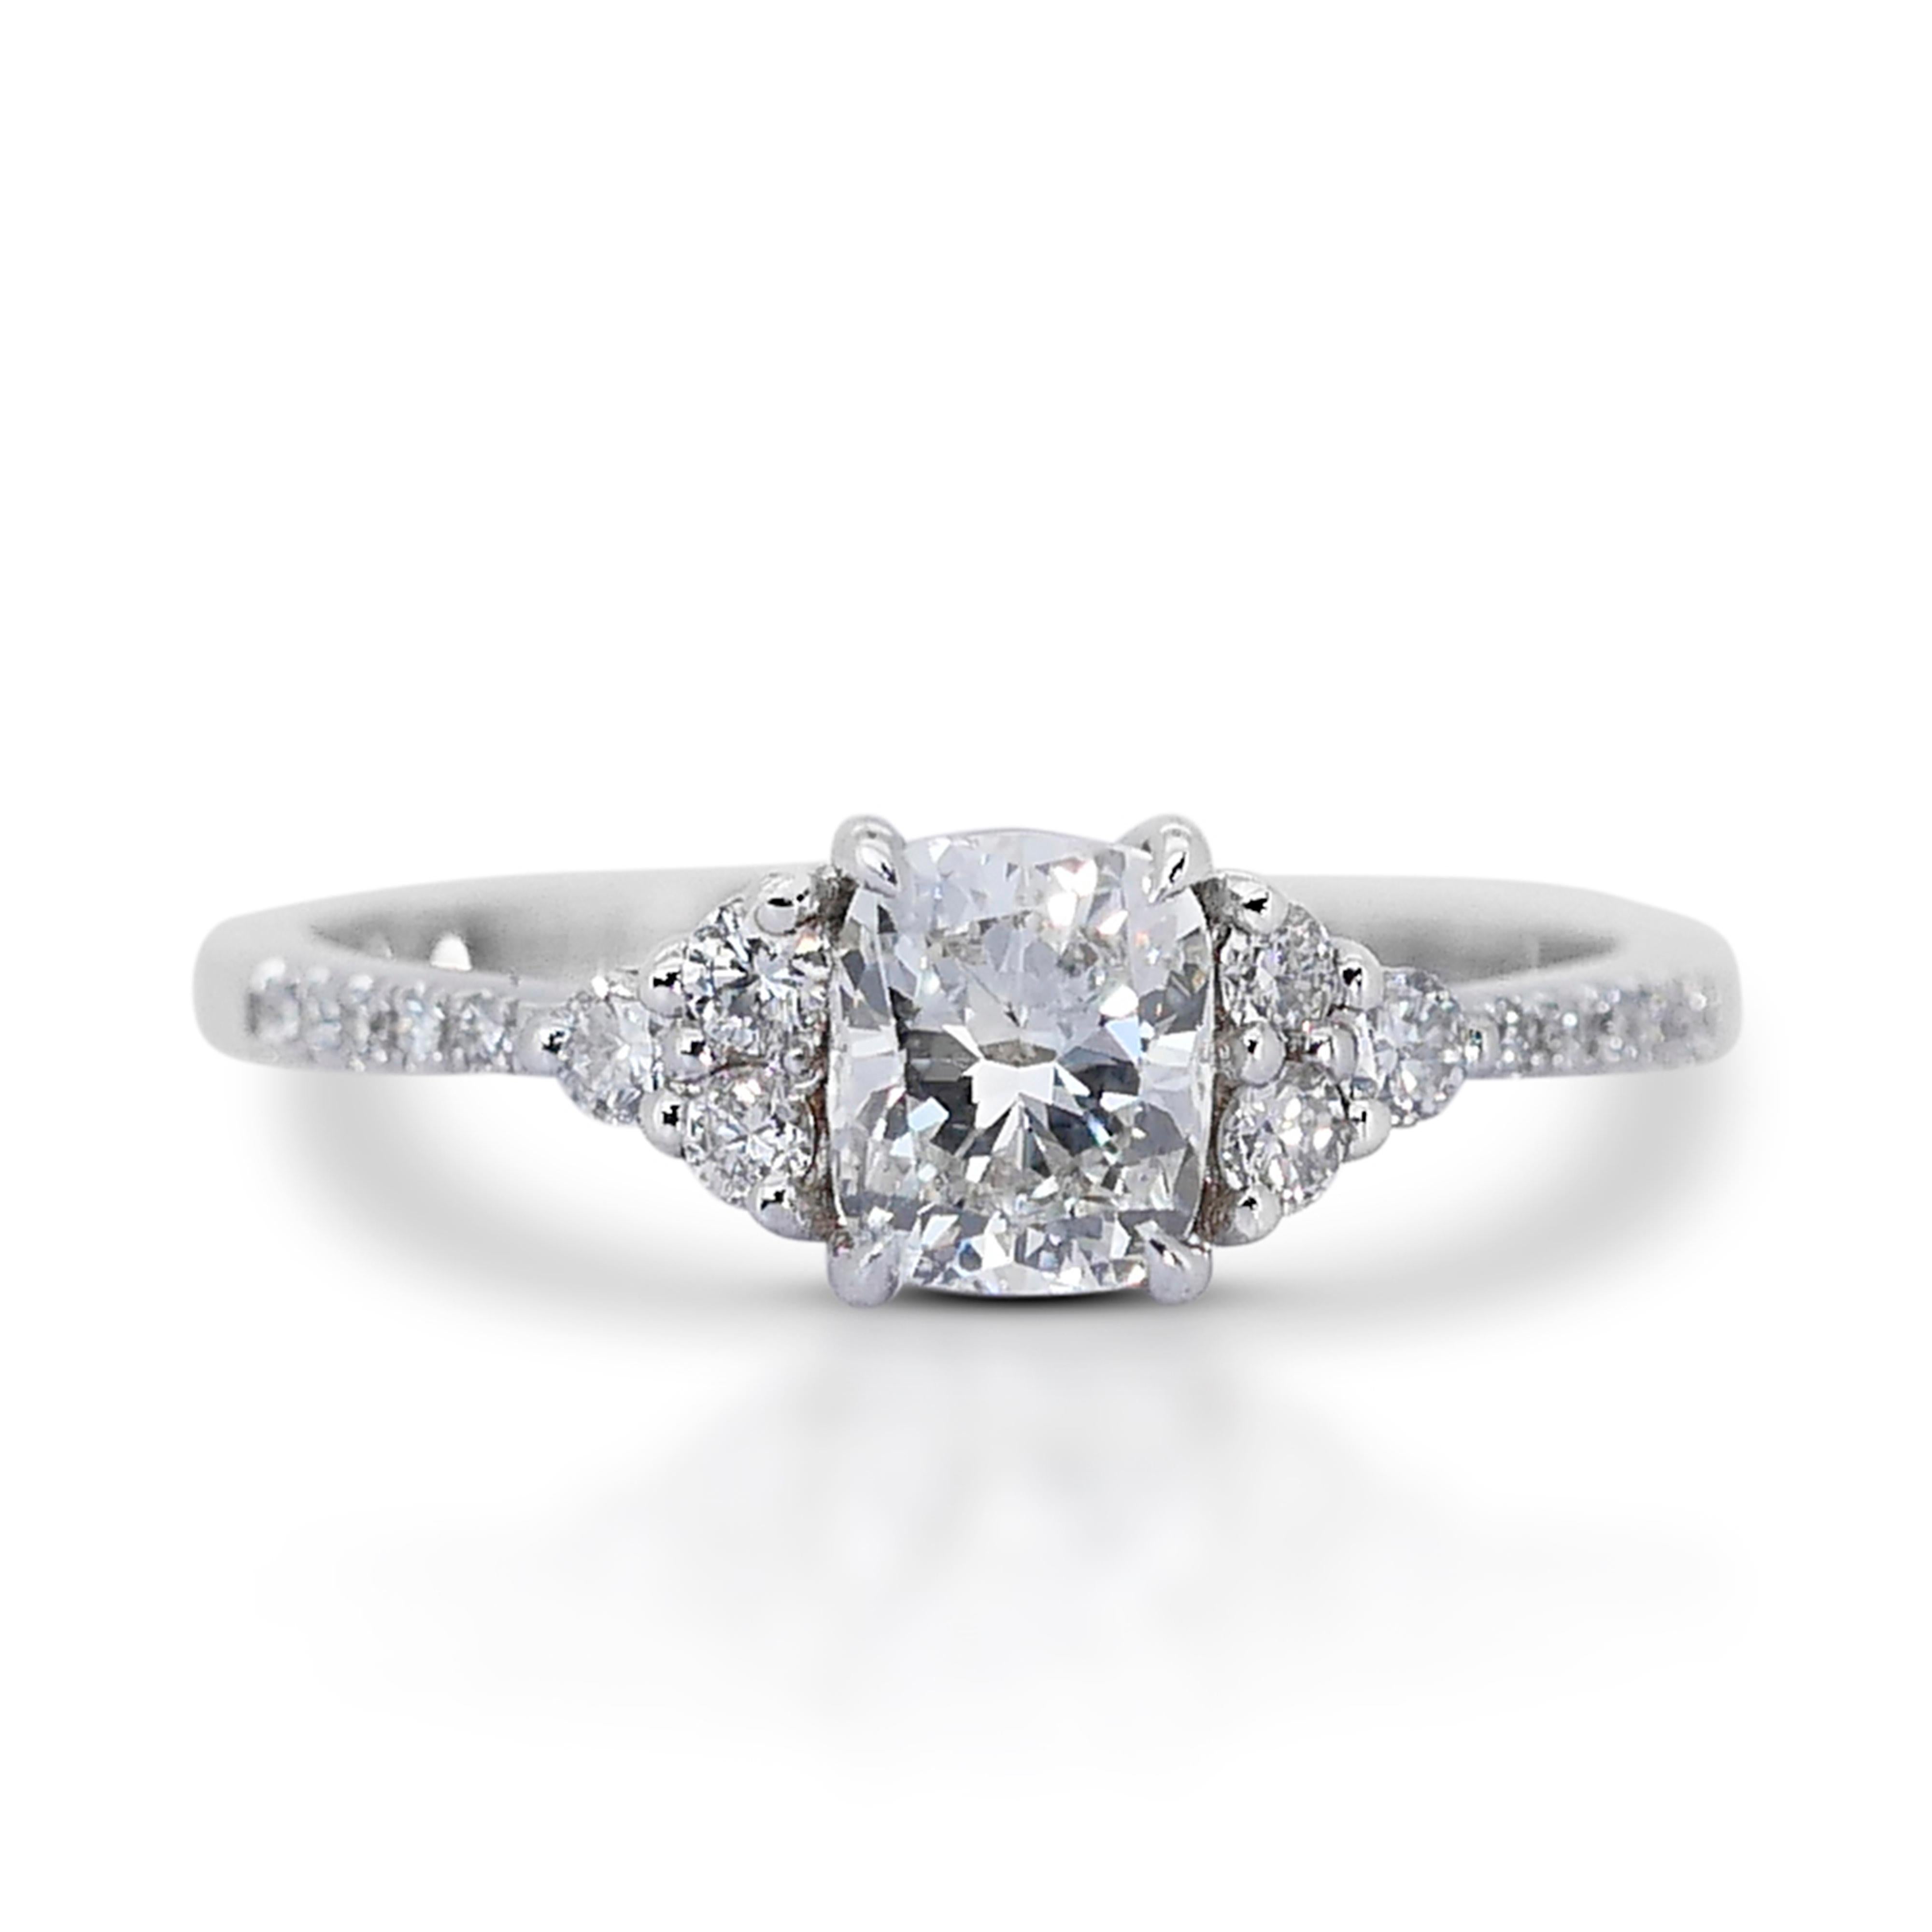 Stunning 18K White Gold Ideal Cut Natural Diamond Ring w/1.73ct

This exquisite ring features a breathtaking 1.73 carat natural diamond, expertly cut to ideal proportions to maximize its brilliance. The dazzling center diamond, with its ideal cut,